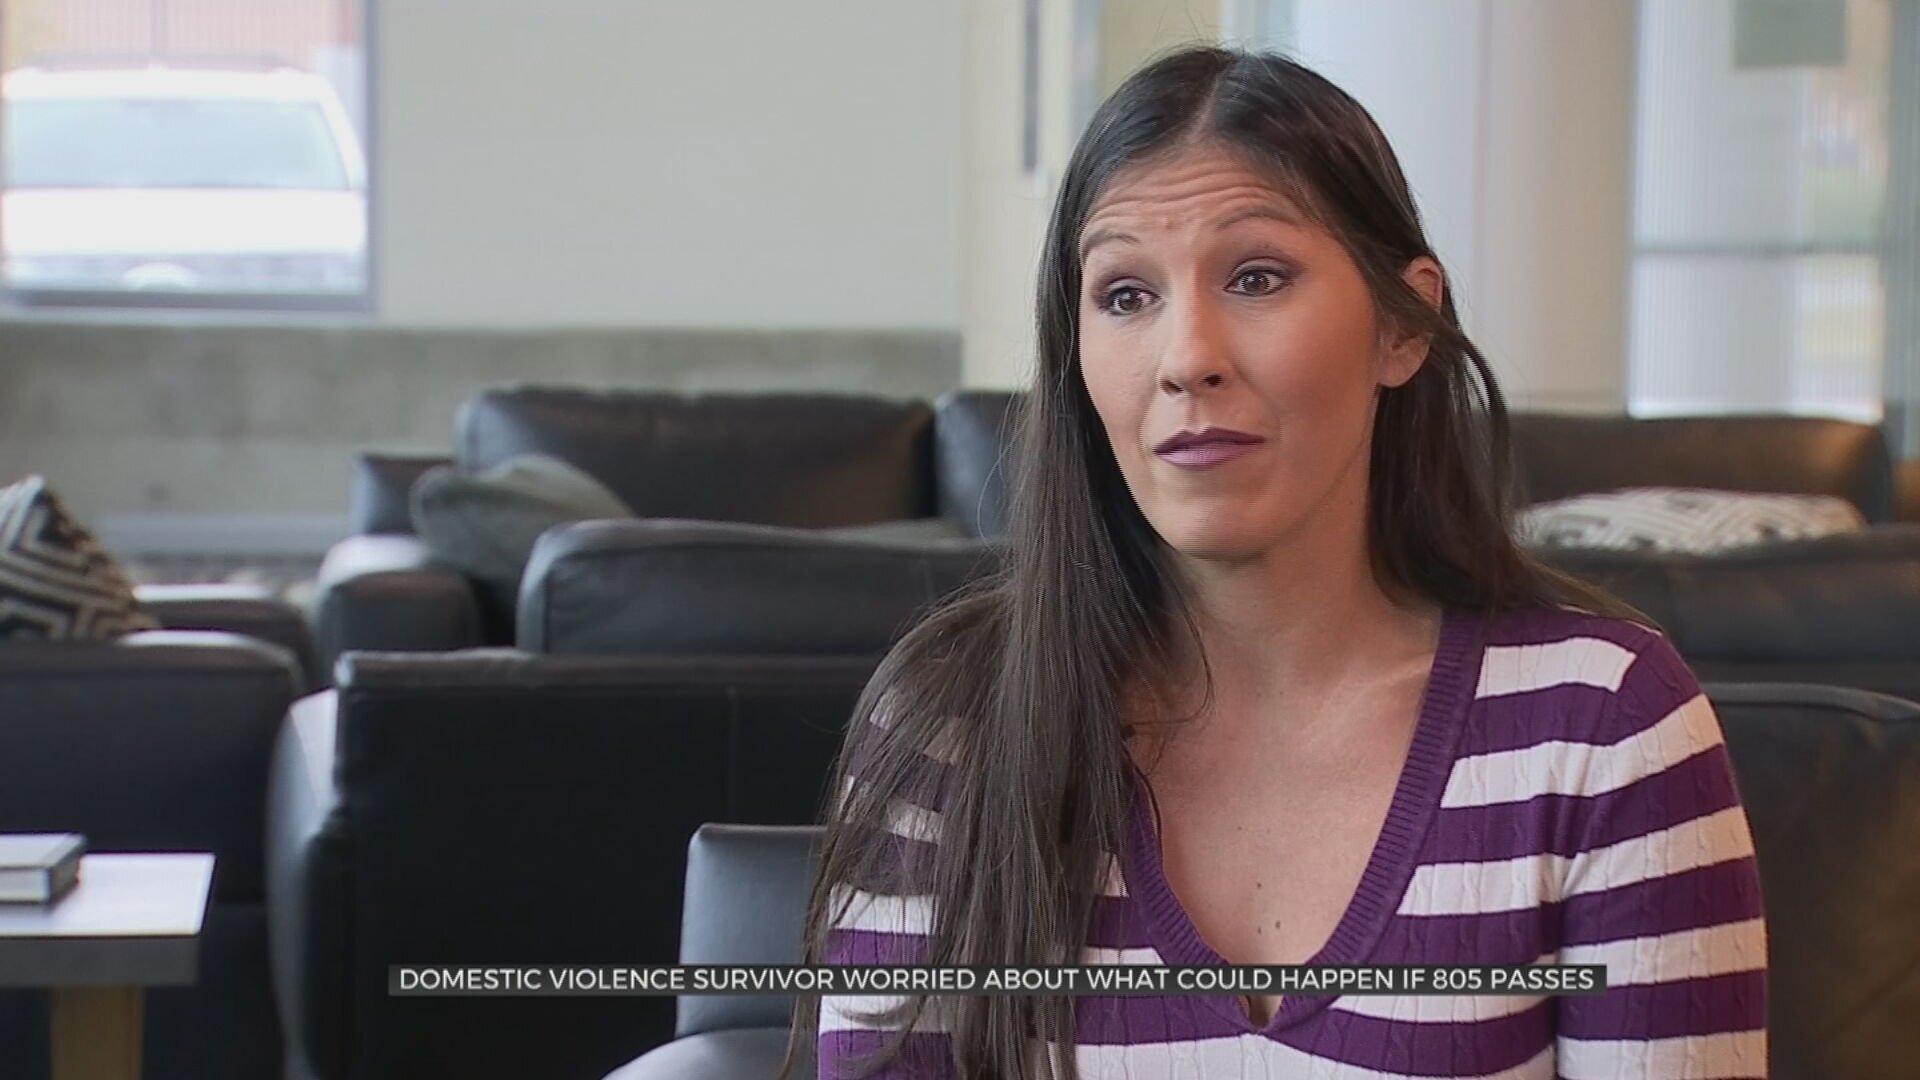 Domestic Violence Survivor Worried About Implications Of SQ 805 